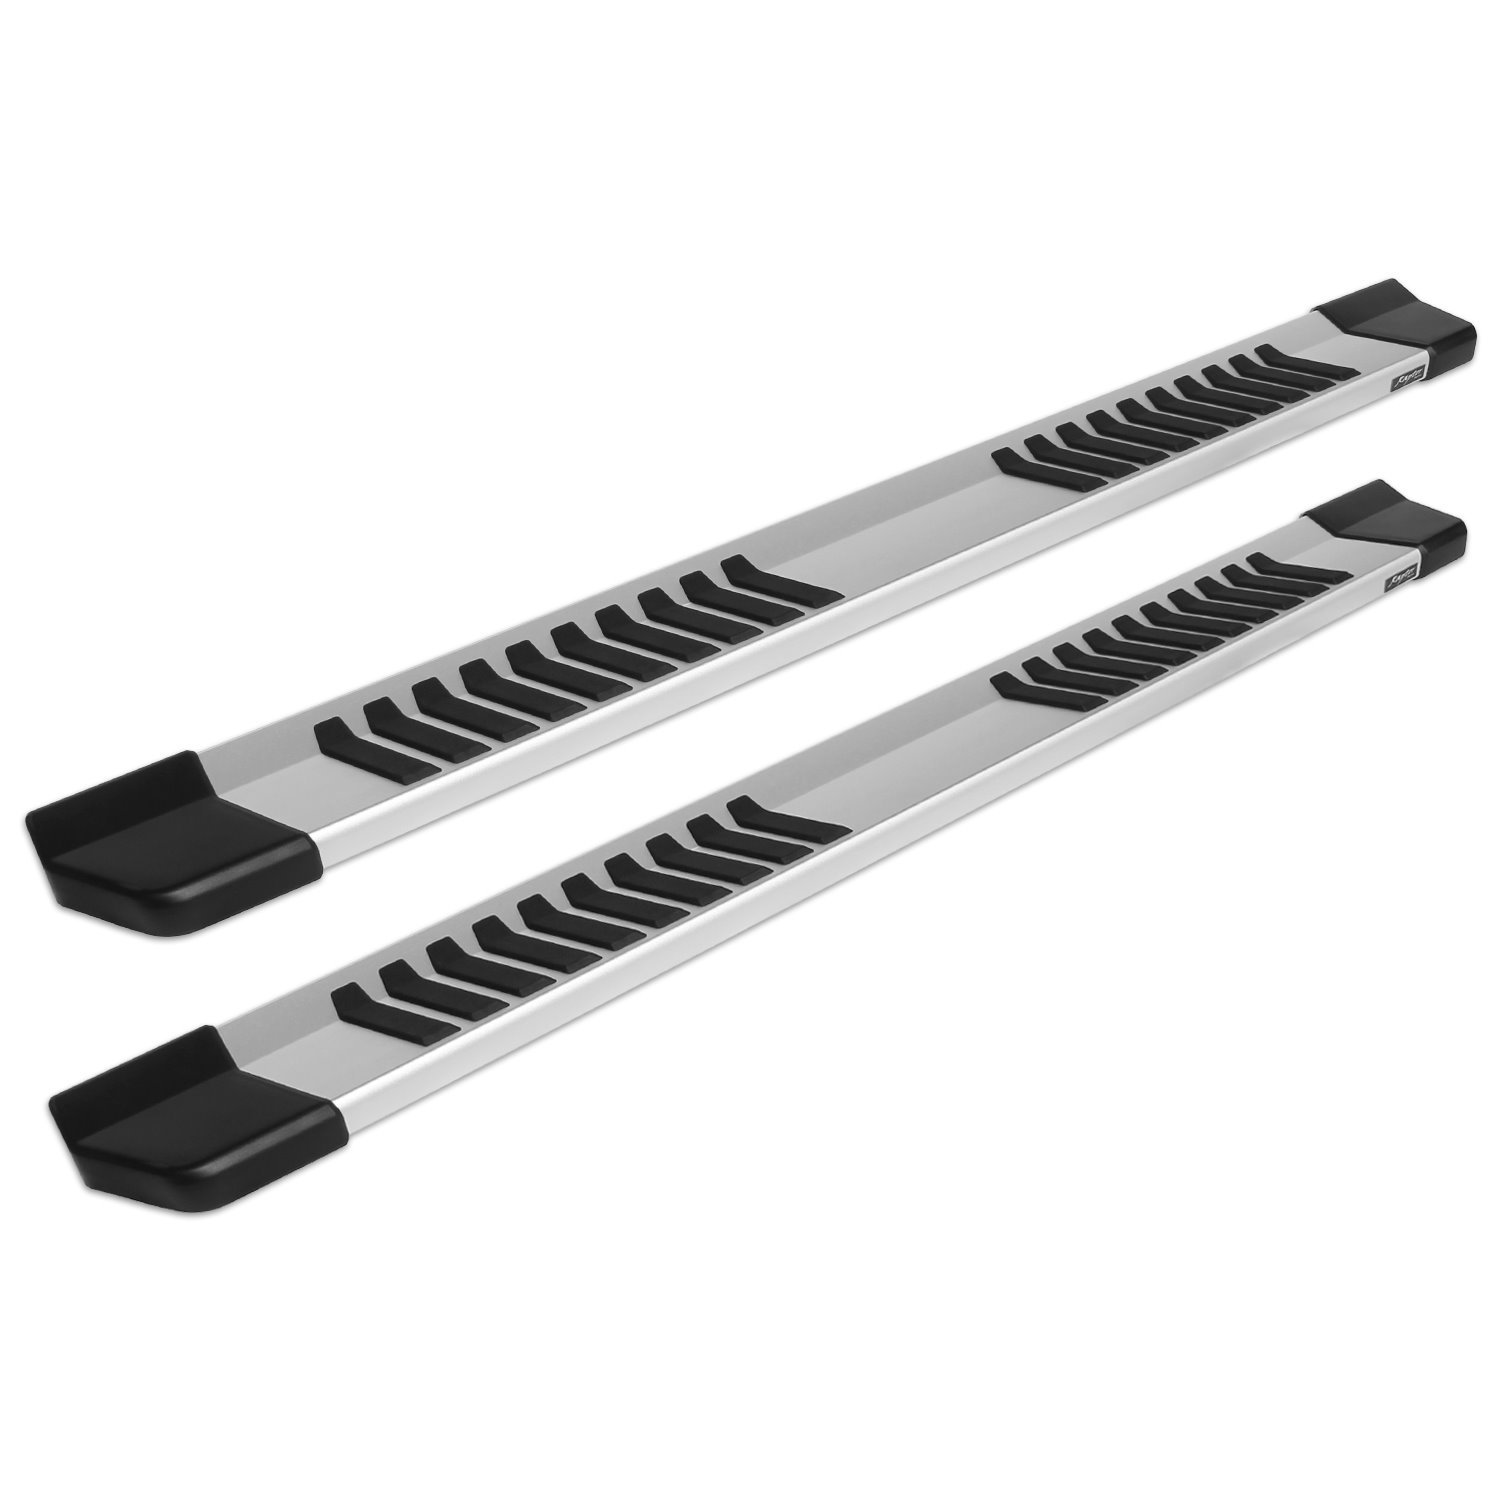 1707-0431 6 in OEM Style Slide Track Running Boards, Brushed Aluminum, Fits Select Nissan Frontier